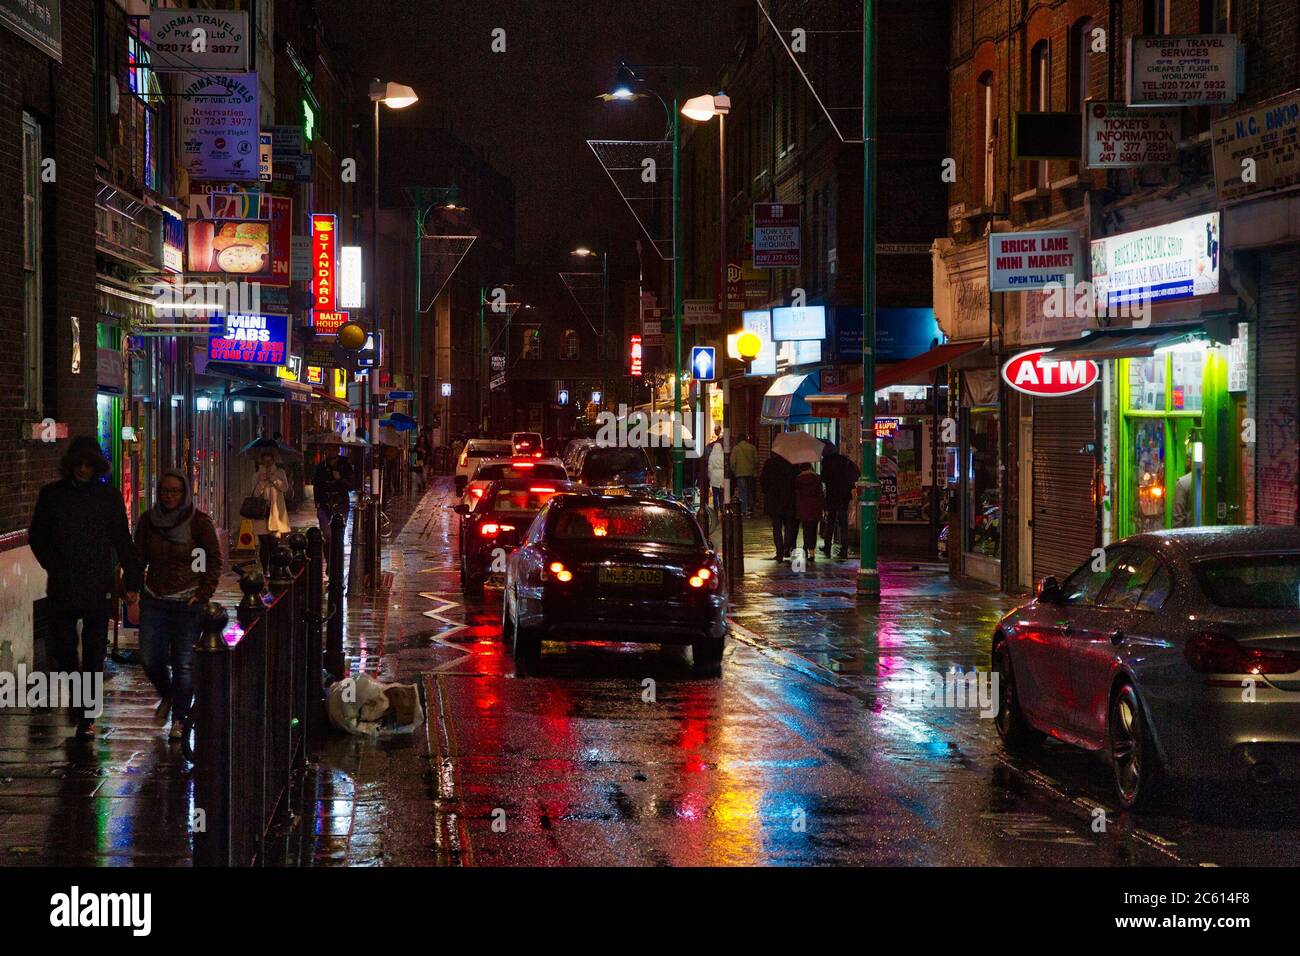 LONDON, UK - APRIL 22, 2016: People walk by ethnic stores and restaurants at night Brick Lane, Shoreditch, London. Shoreditch is known for its multicu Stock Photo